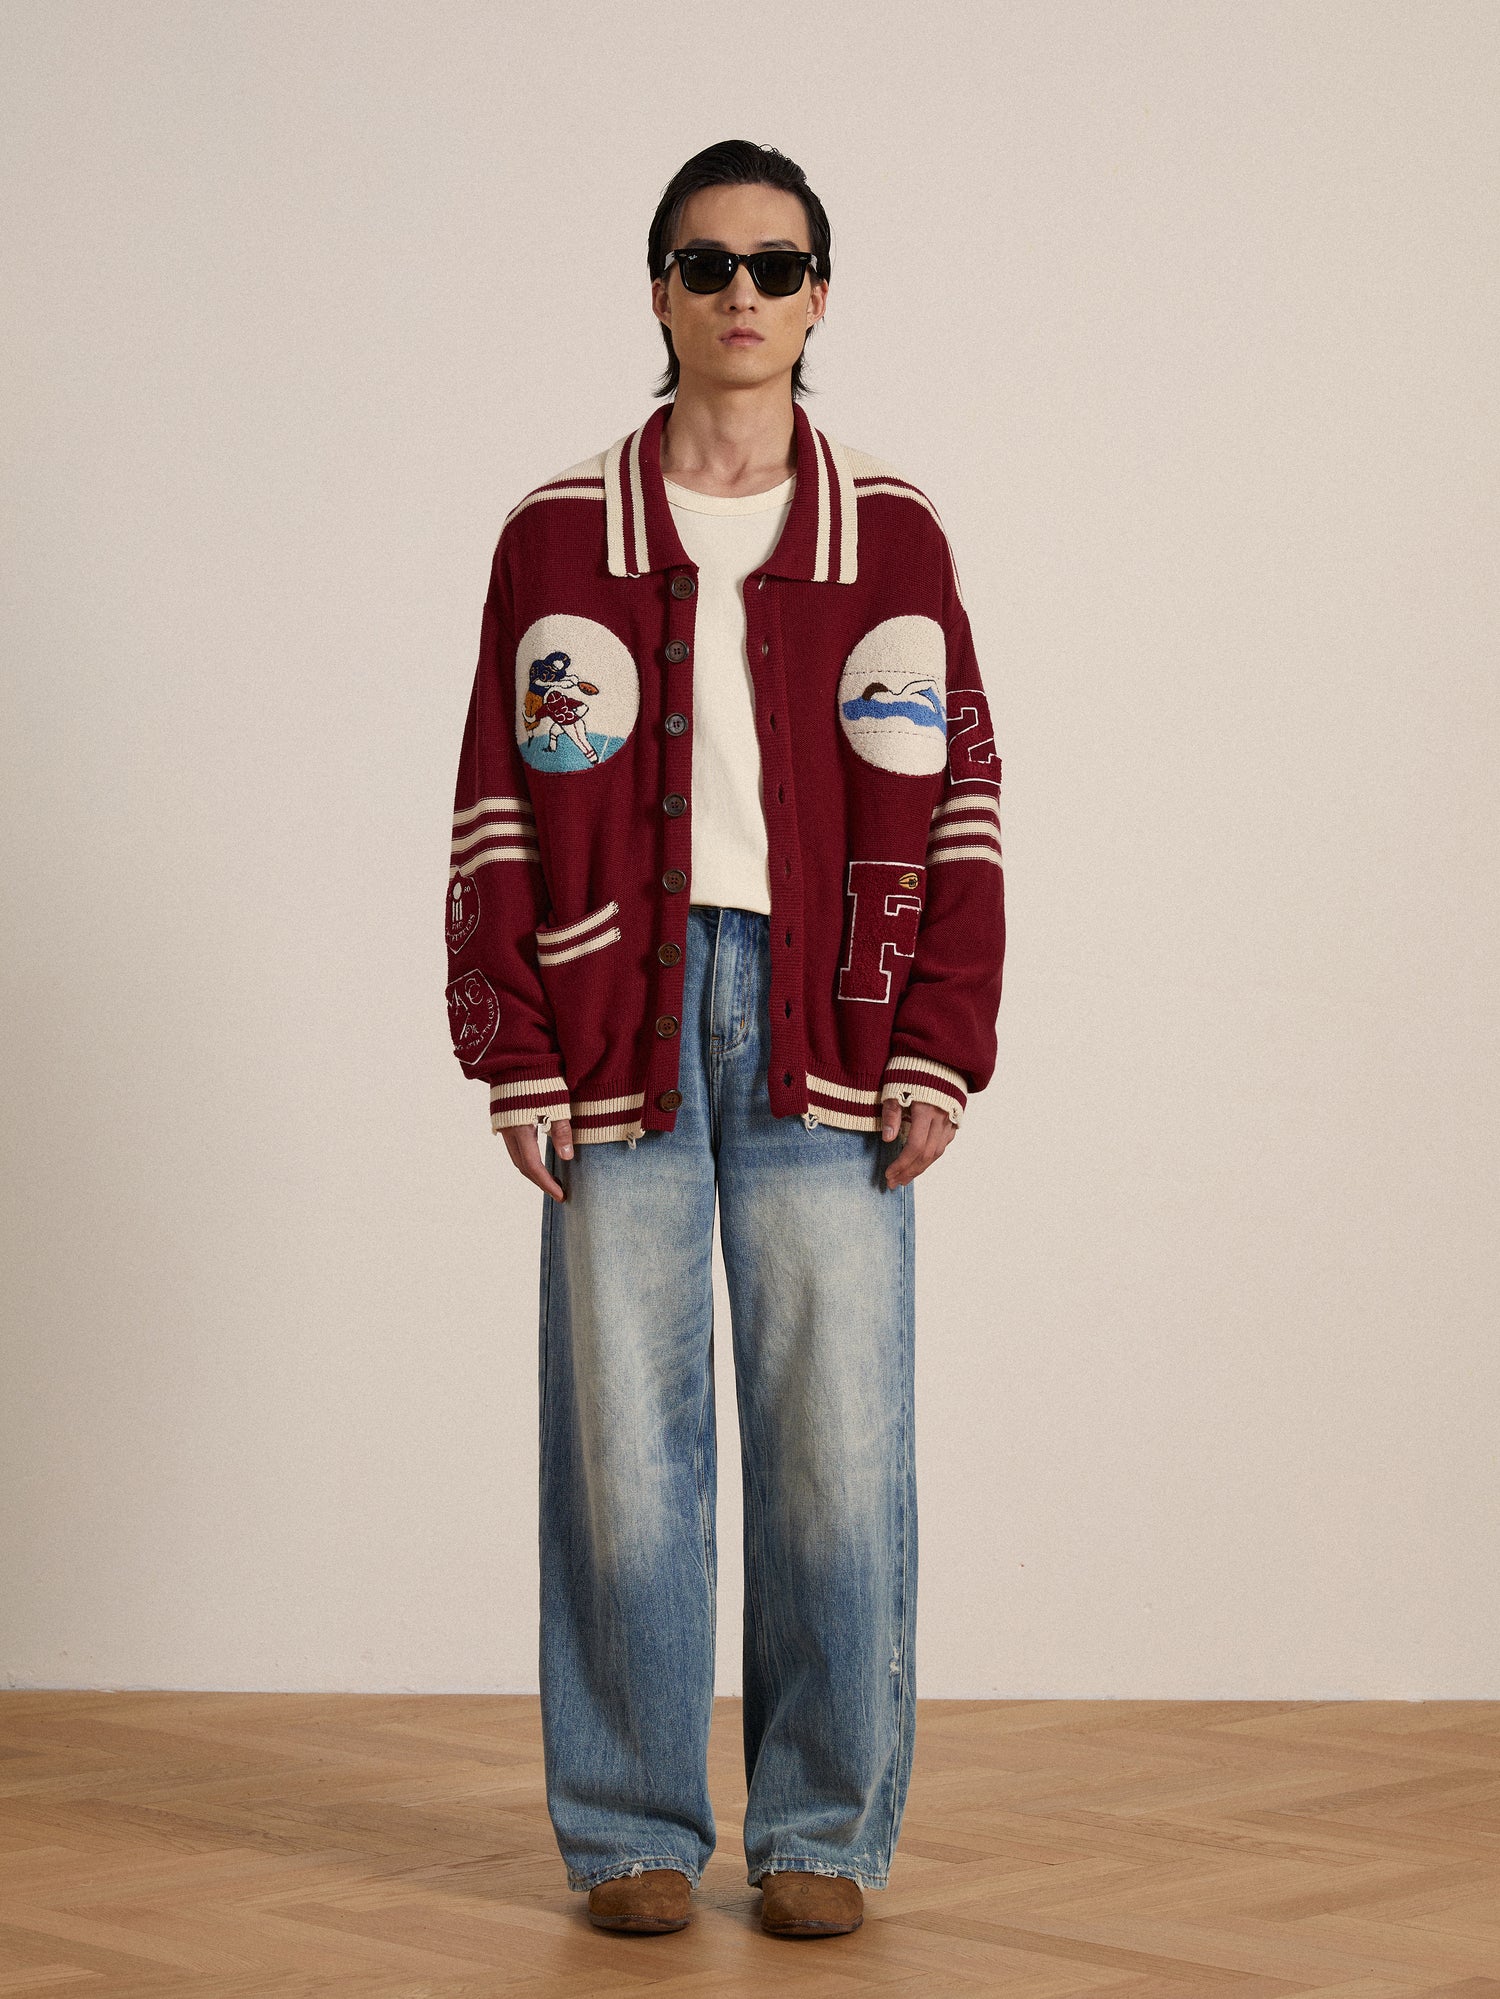 A man wearing a burgundy Found Varsity Patch Collared Cardigan and jeans, reflecting vintage Ivy League fashion.